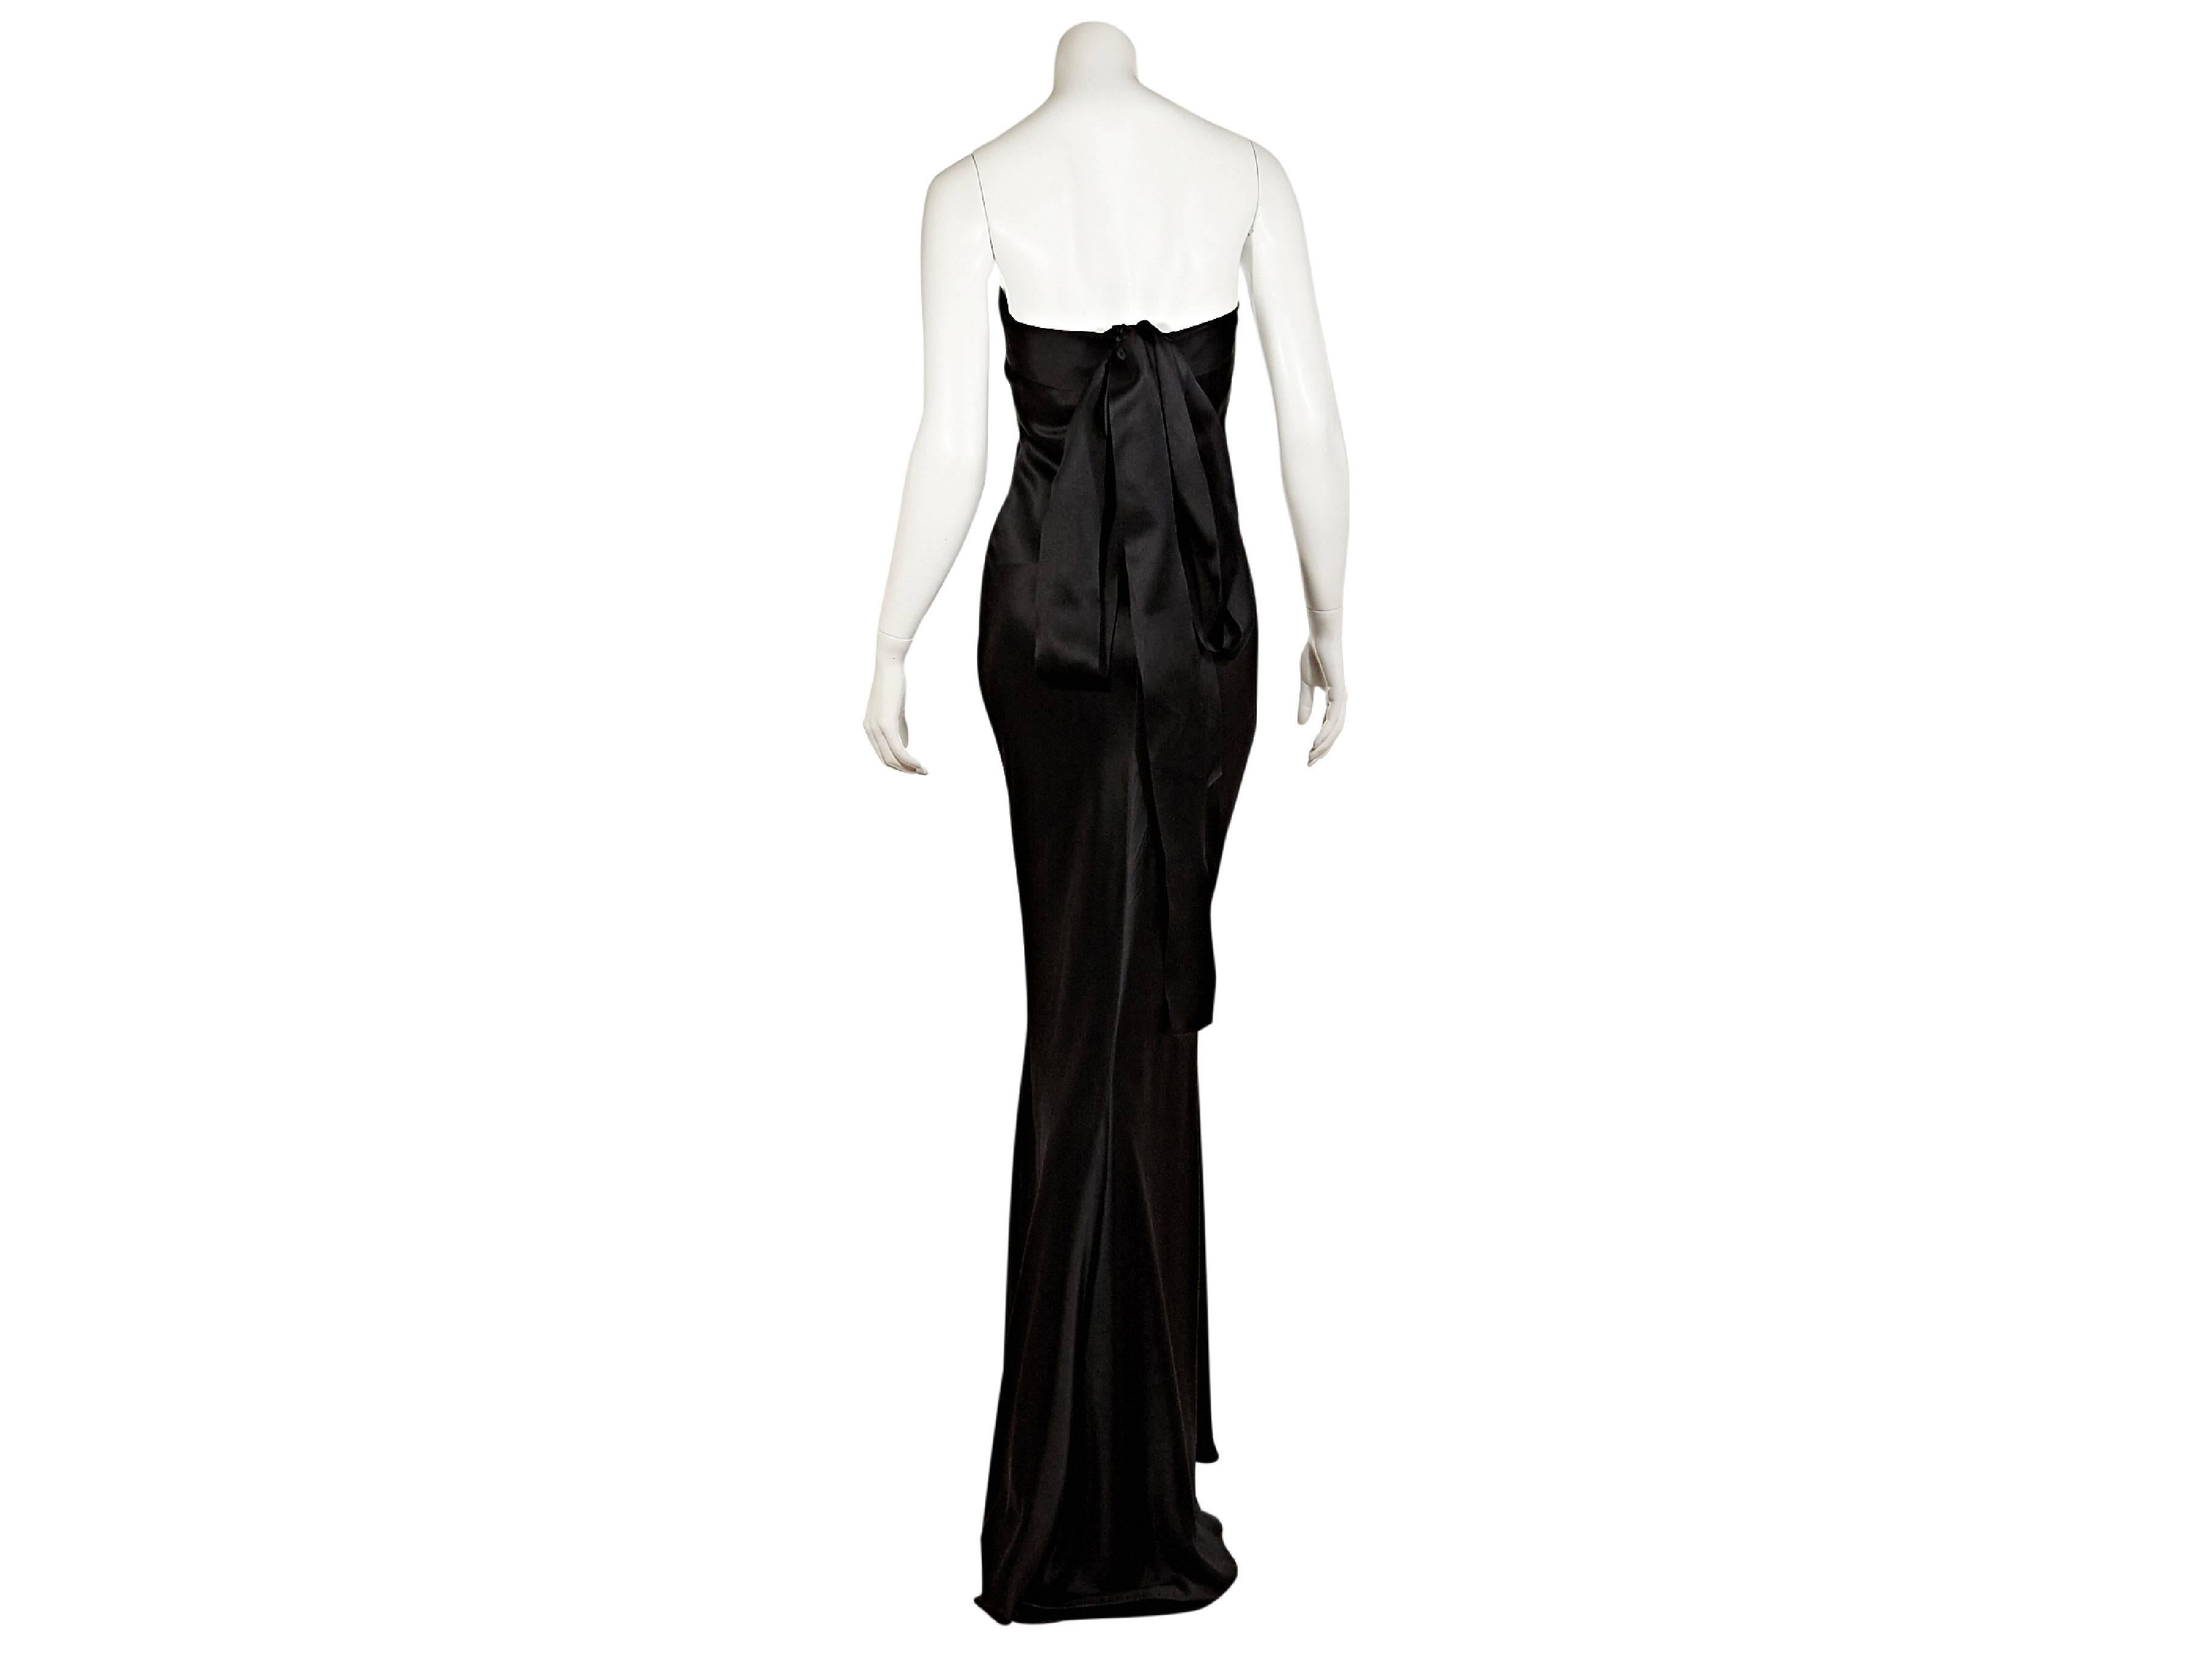 Black strapless satin gown by J. Mendel.  Banded topline.  Seam work creates a flattering silhouette.  Oversized back bow.  